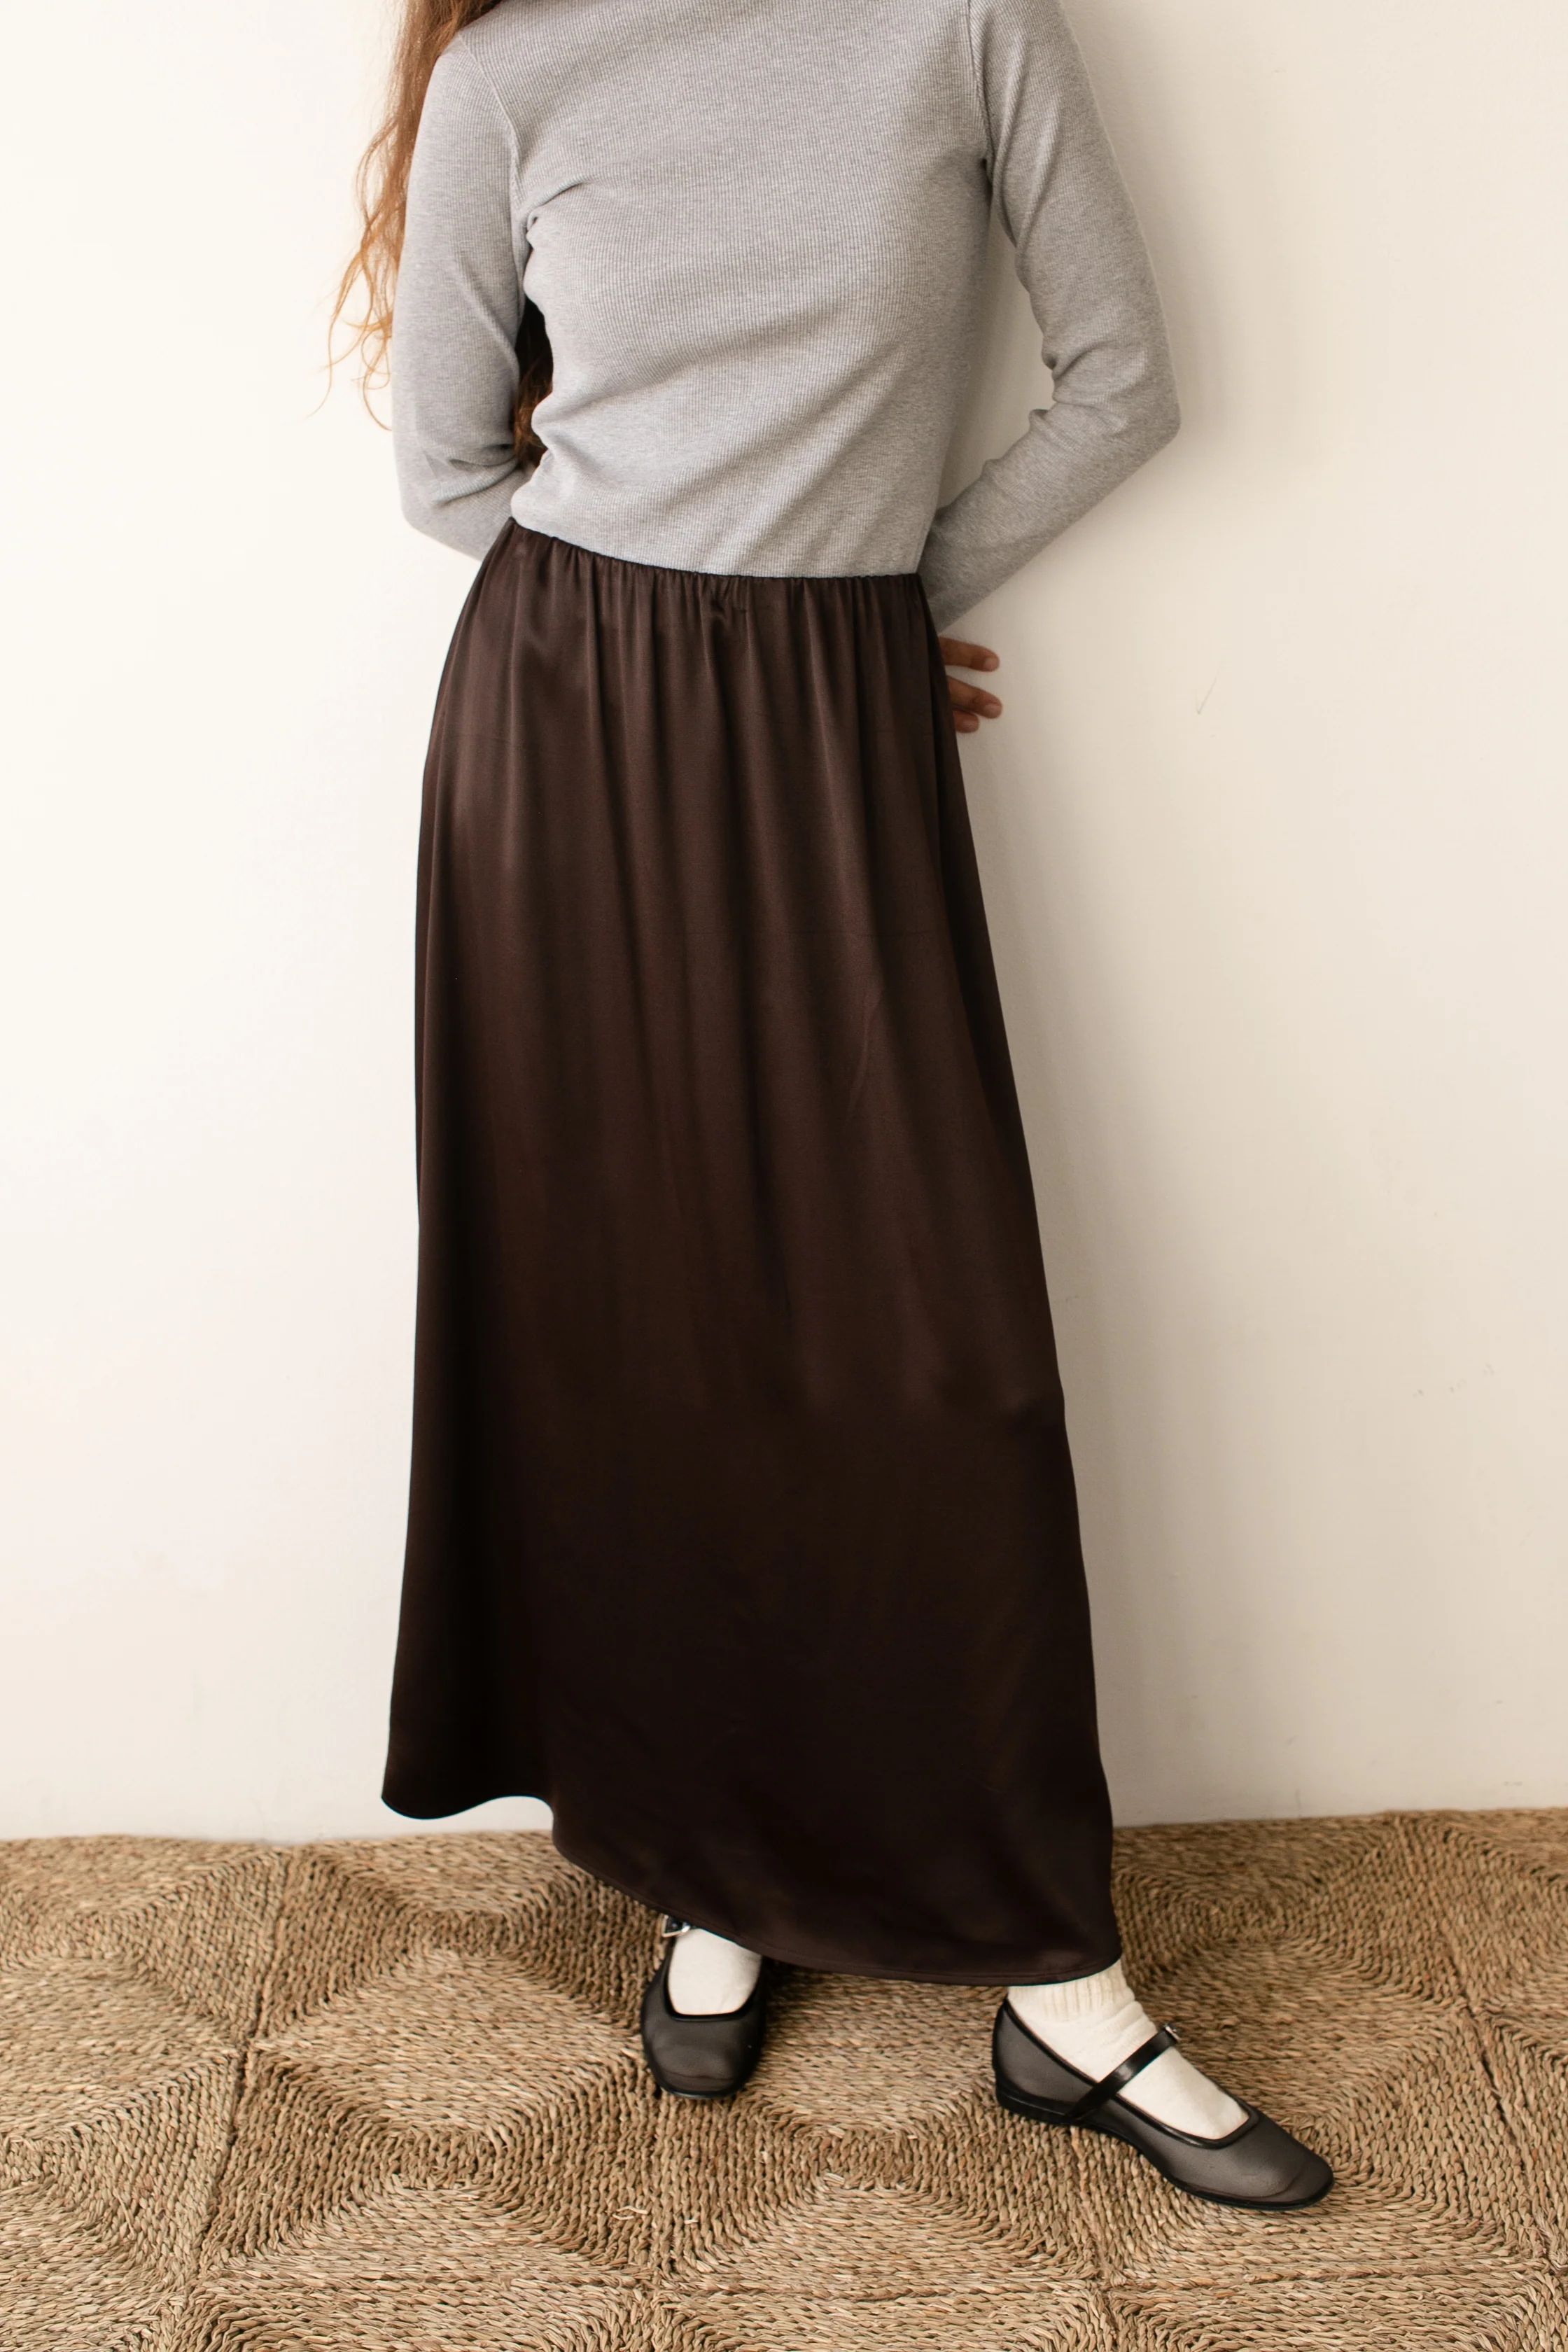 The Satiny Simple Skirt | DONNI.